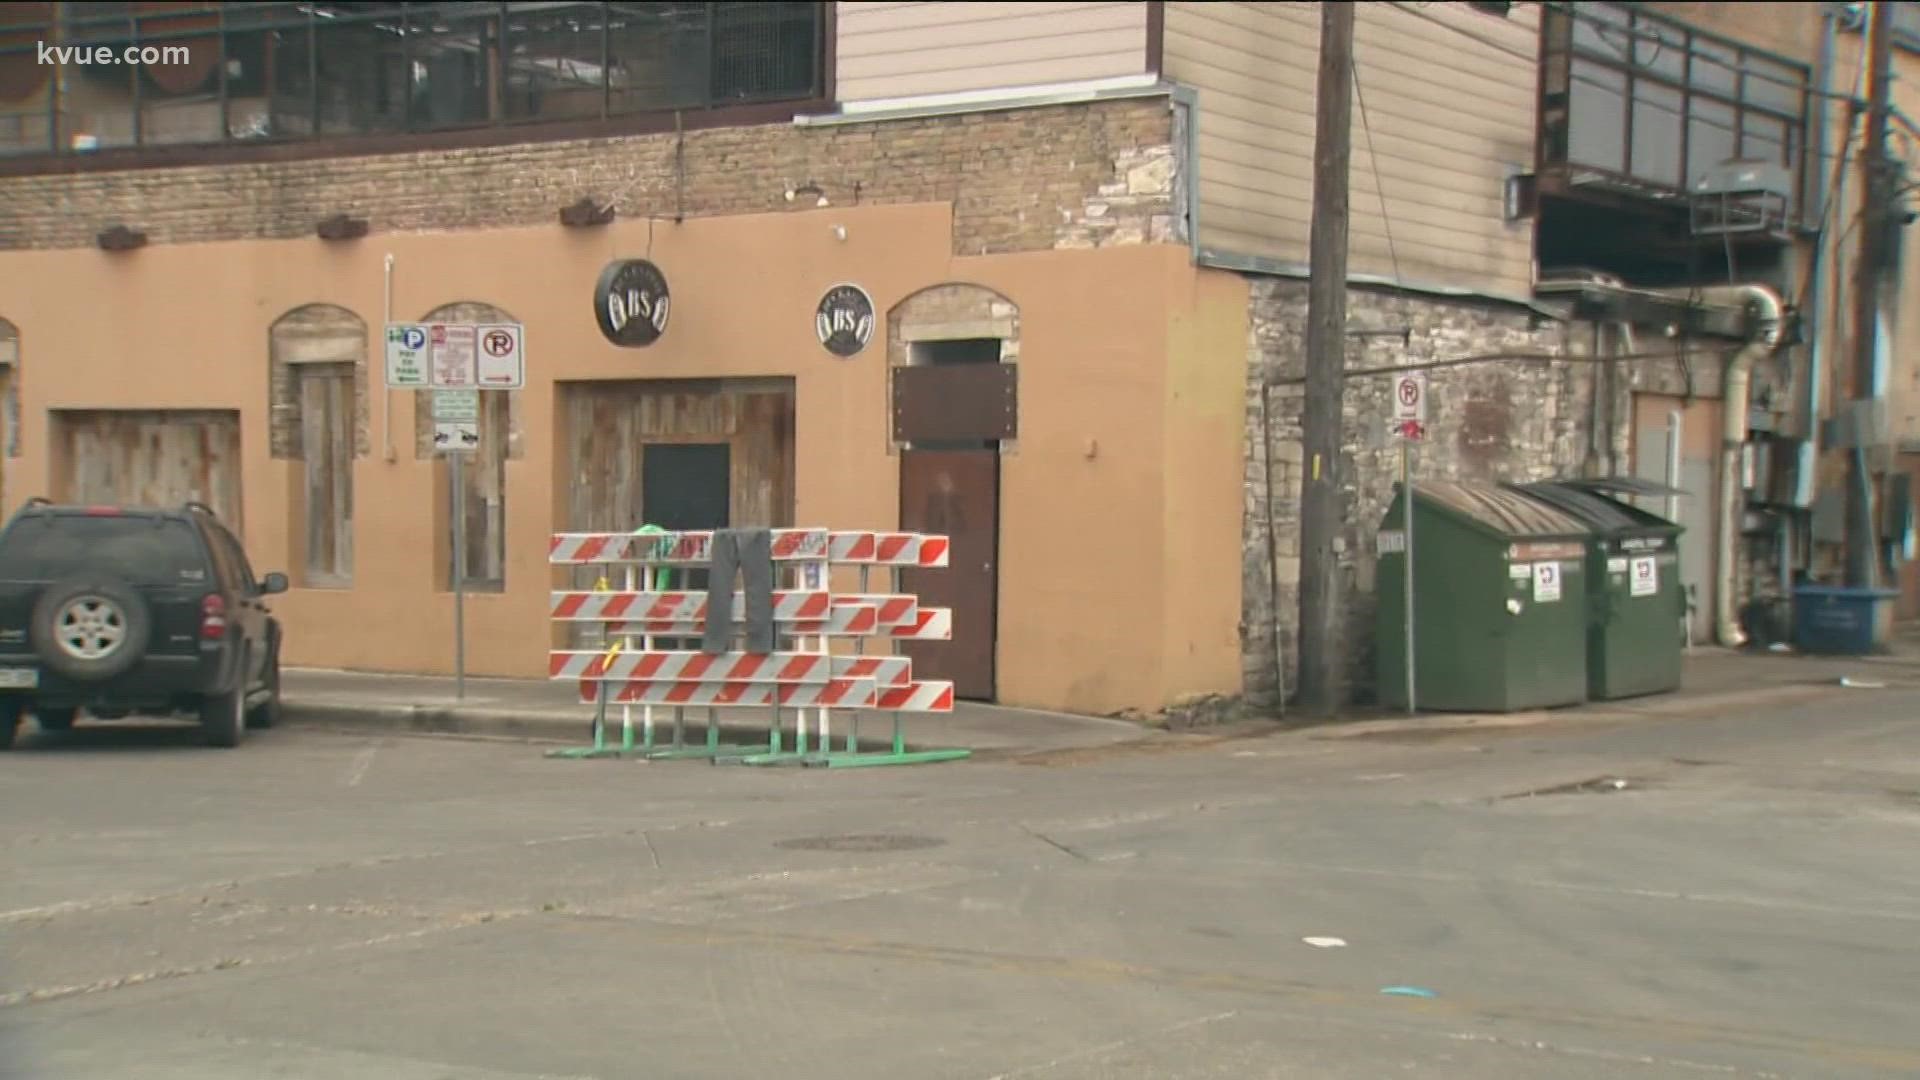 The City of Austin is continuing work to make Sixth Street safer.